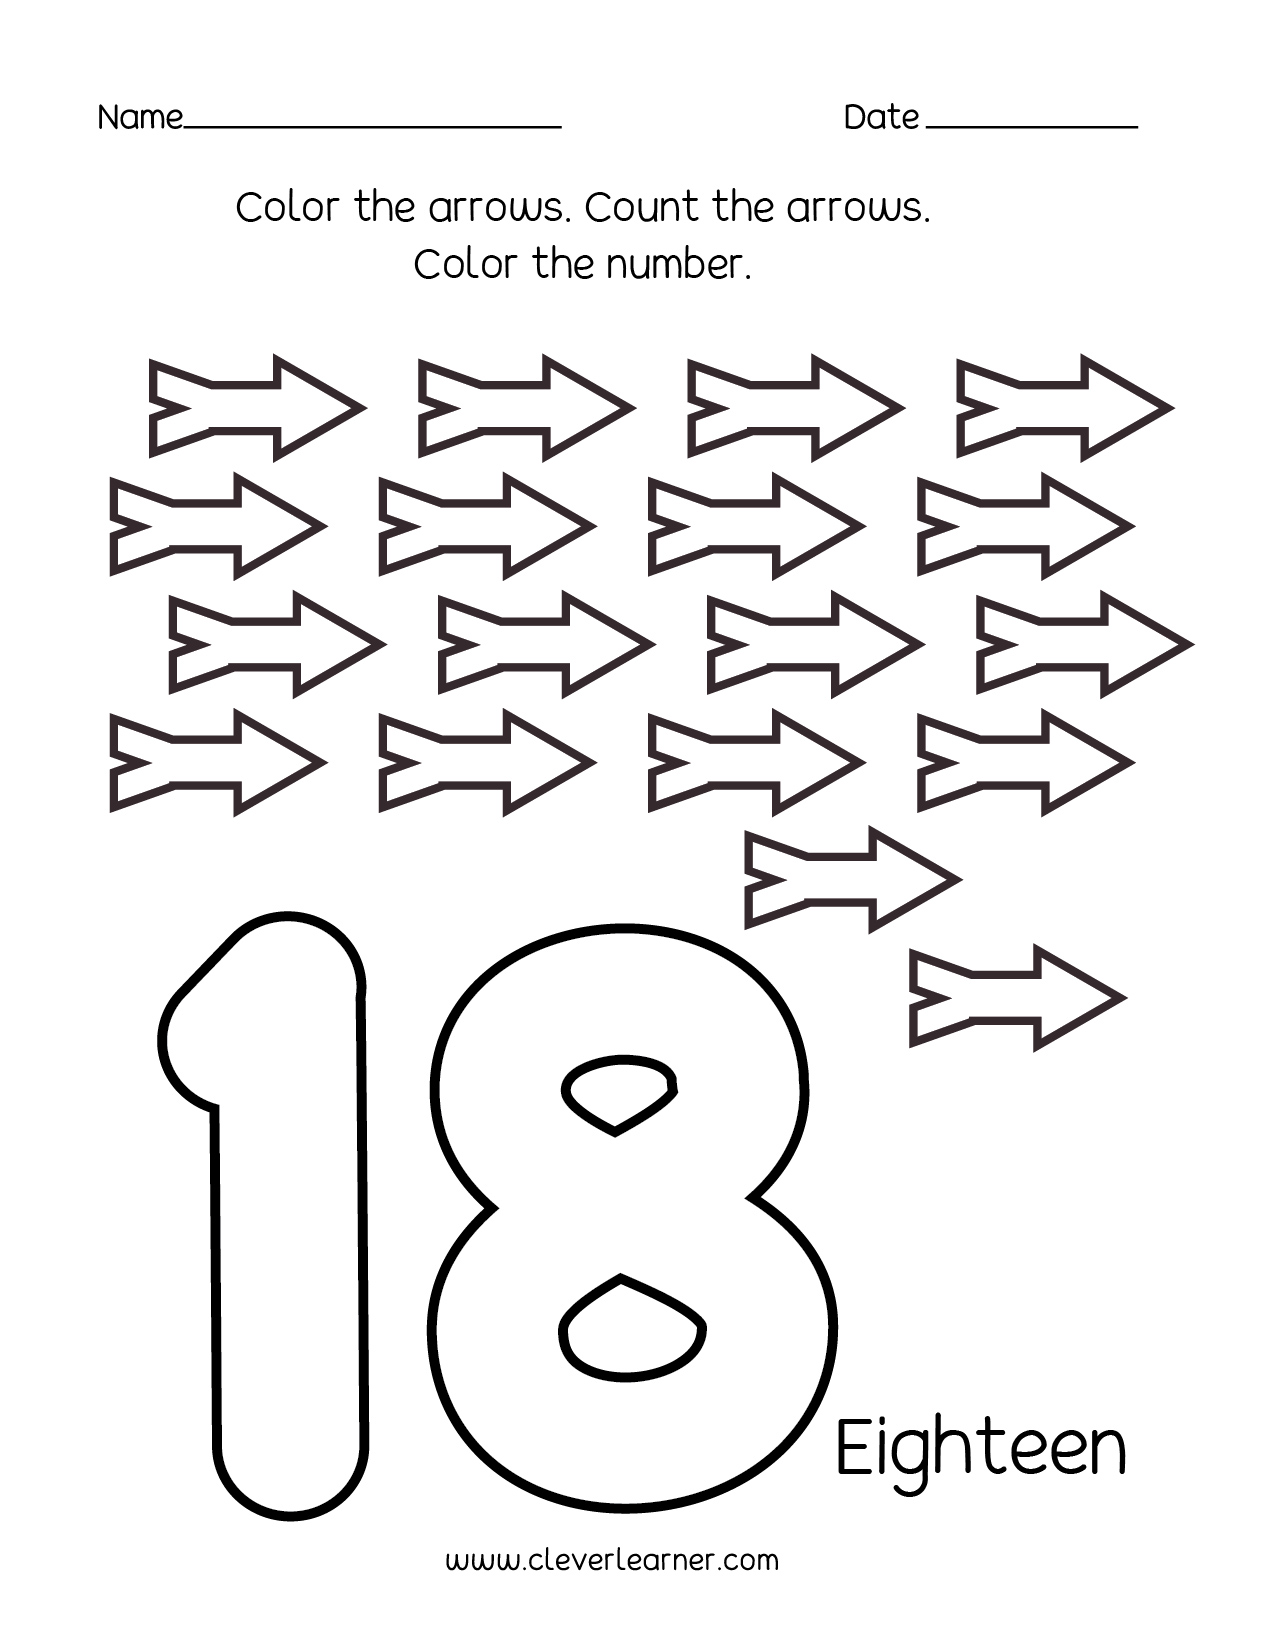 number-18-writing-counting-and-identification-printable-worksheets-for-children